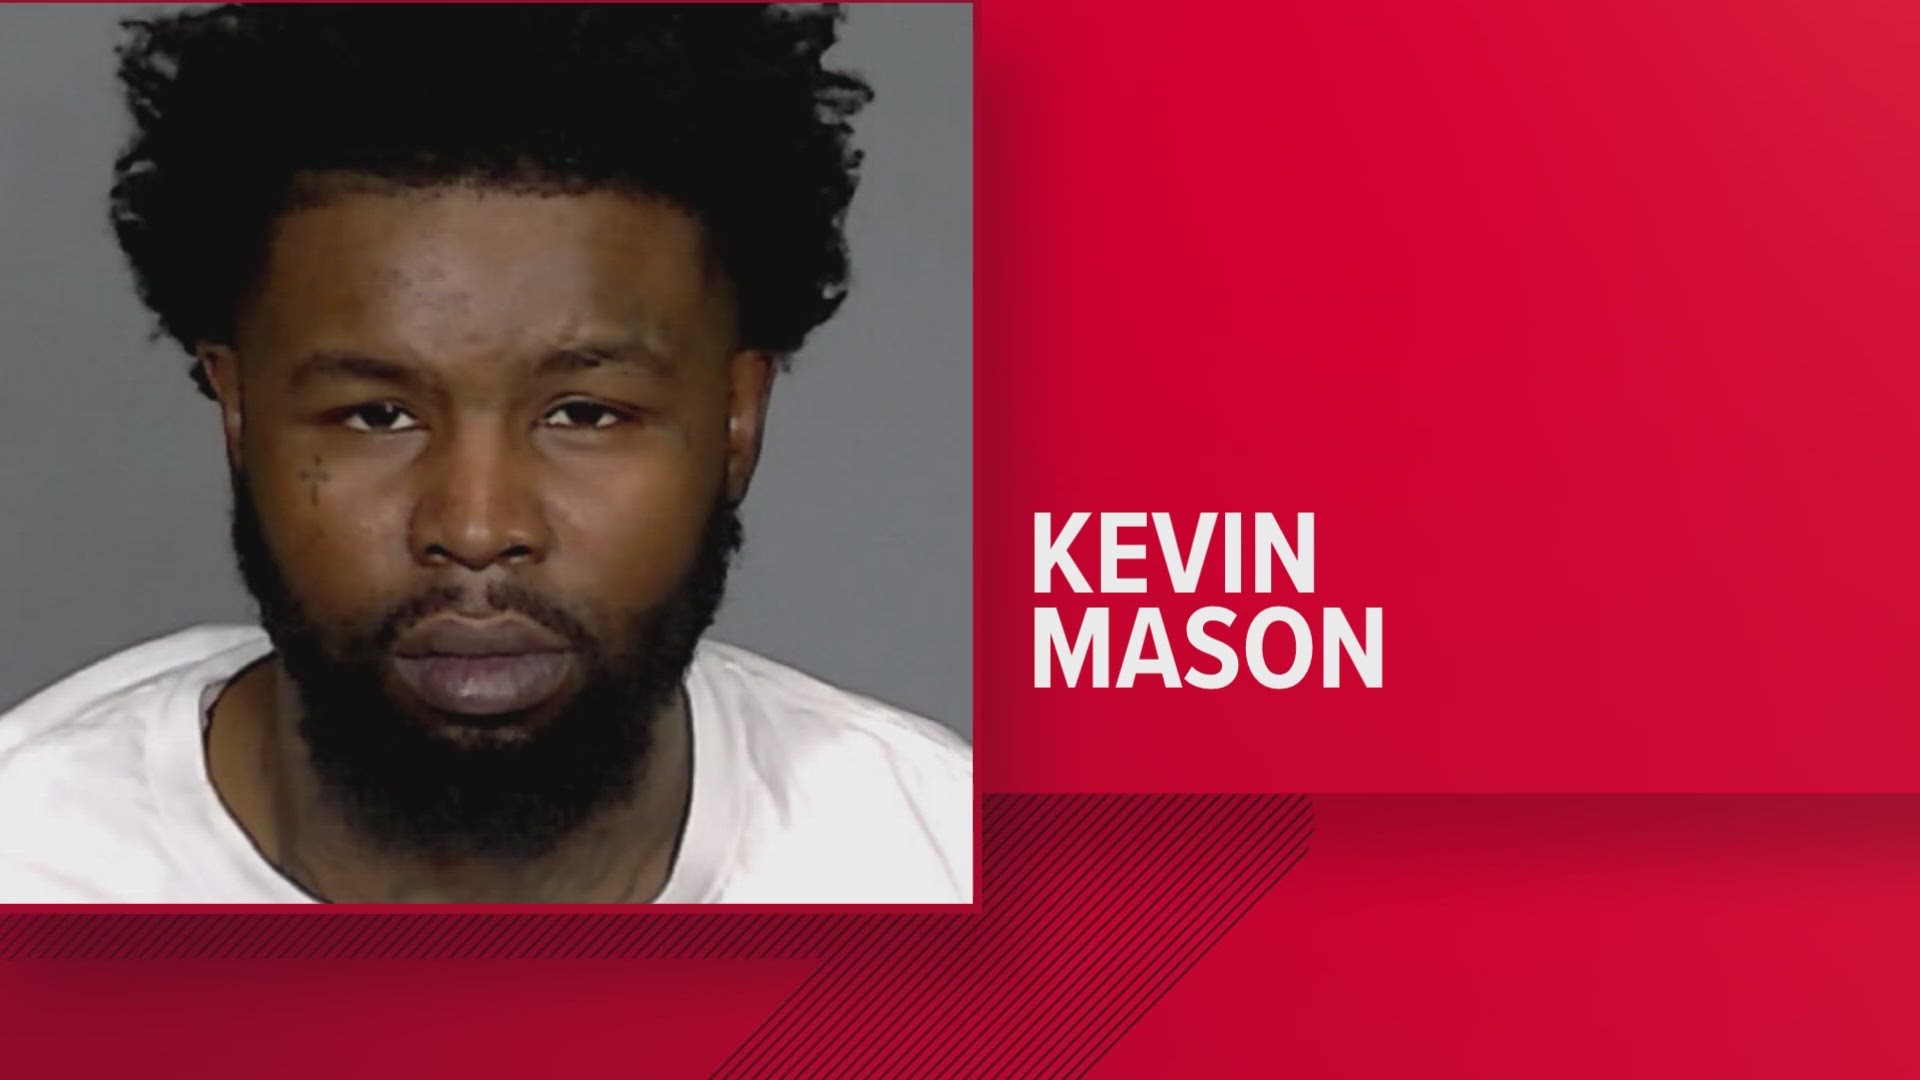 US Marshals Services takes over investigation into Minnesota homicide suspect Kevin Mason who was accidentally released by Marion County Sheriff's Office